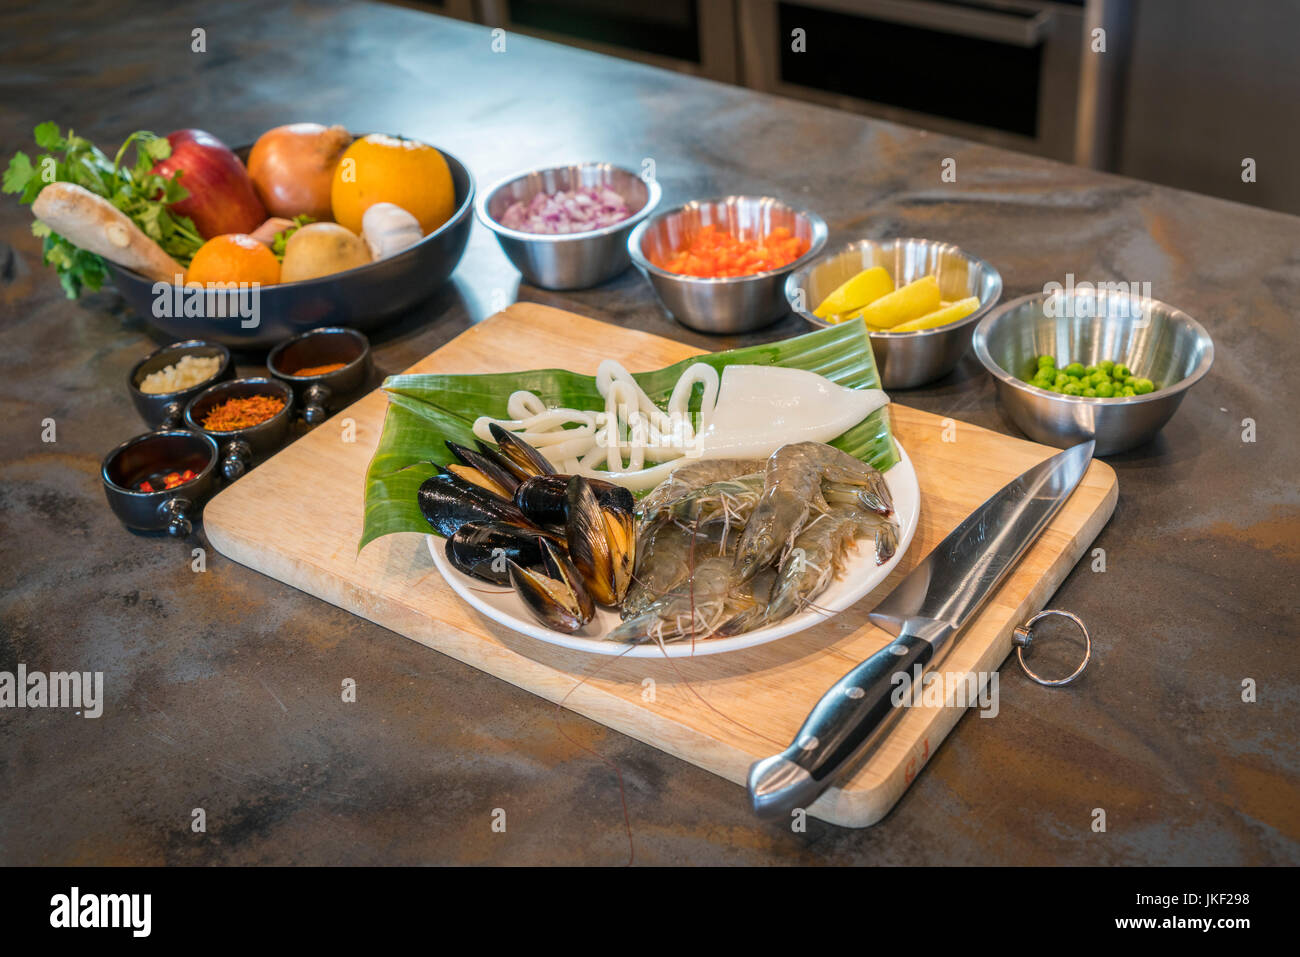 Raw seafood on plate with fruits and vegetables, healthy food, prawn, clam squid. Stock Photo